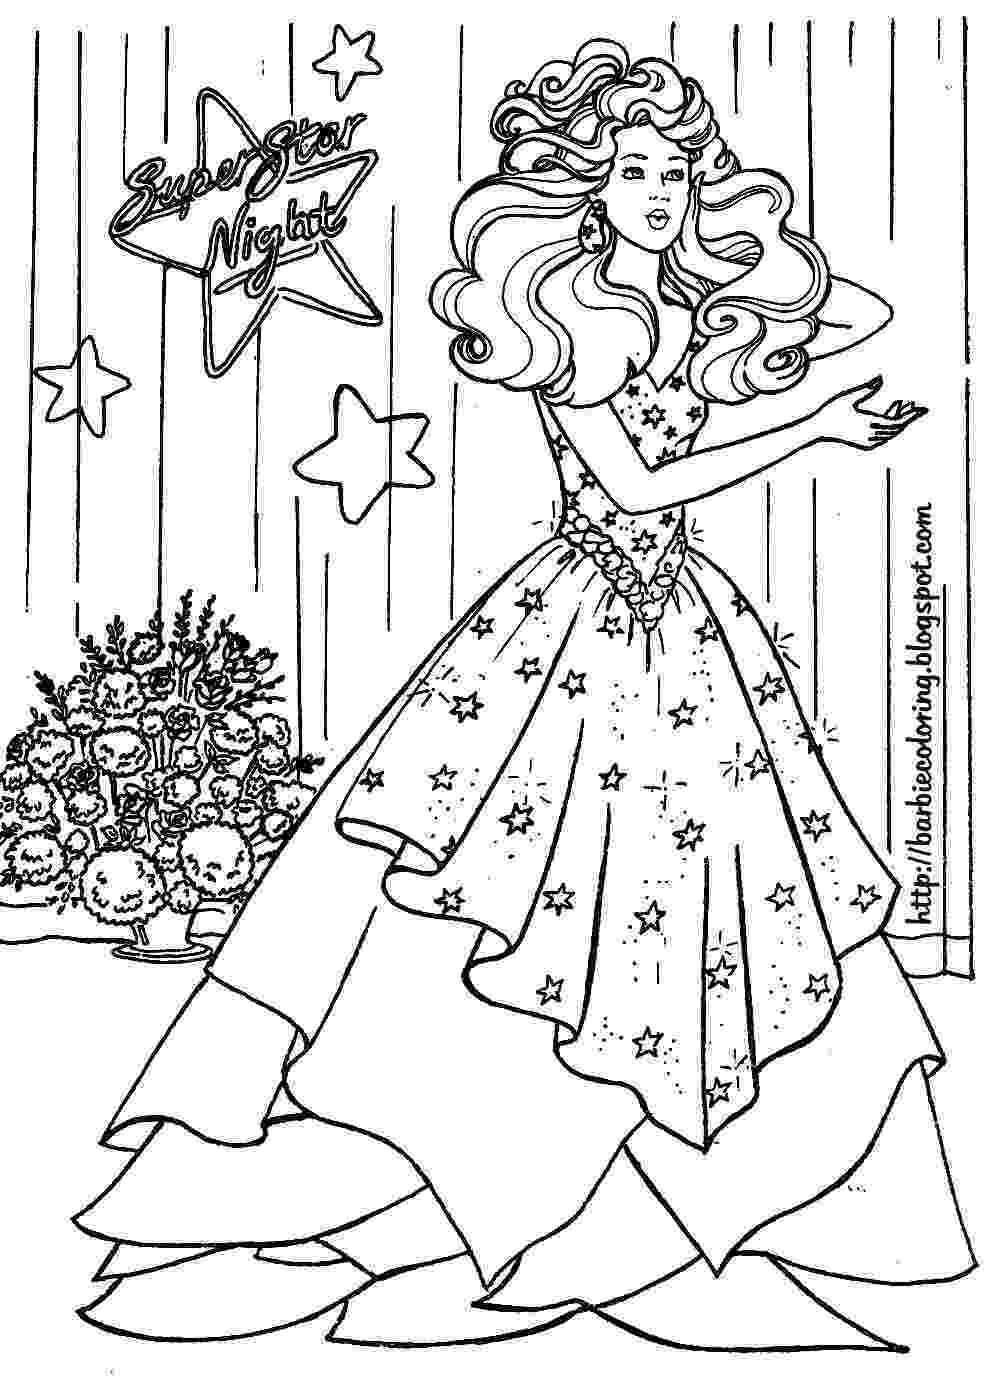 barbie printable colouring pages barbie coloring pages barbie bride and barbie superstar colouring barbie pages printable 